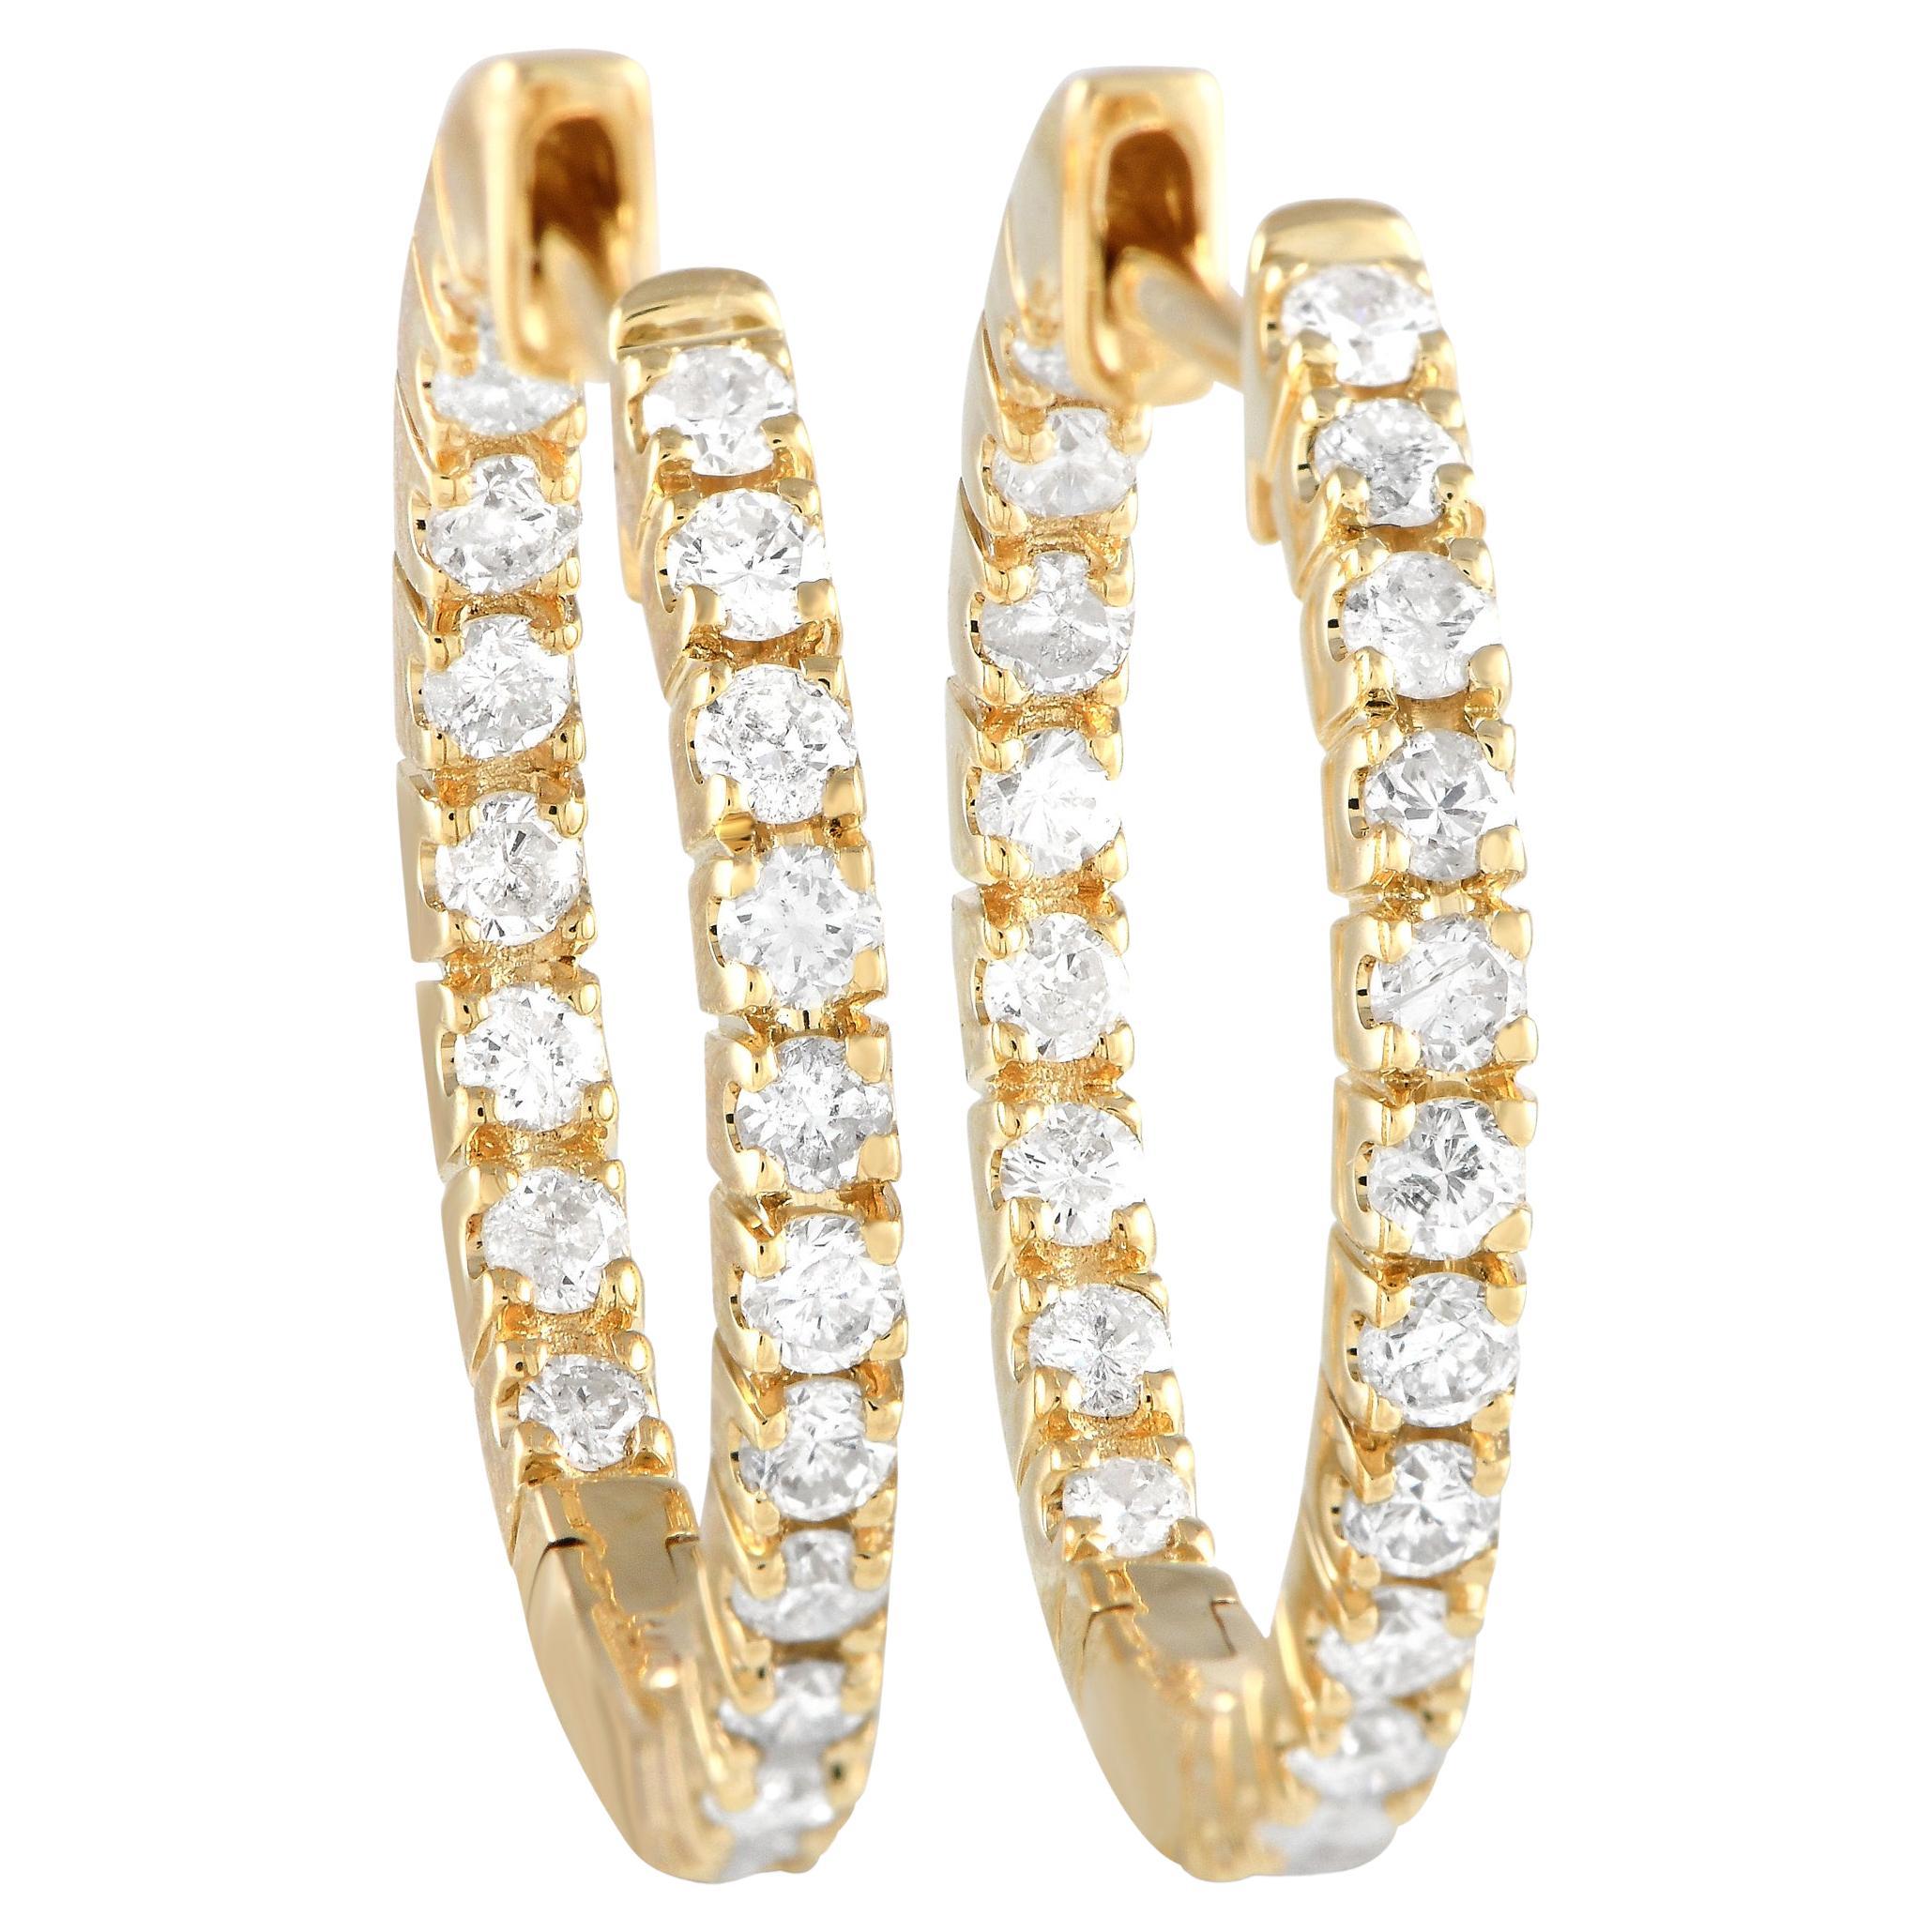 LB Exclusive 14K Gelbgold 0,81ct Diamant Inside-Out Hoop Ohrringe